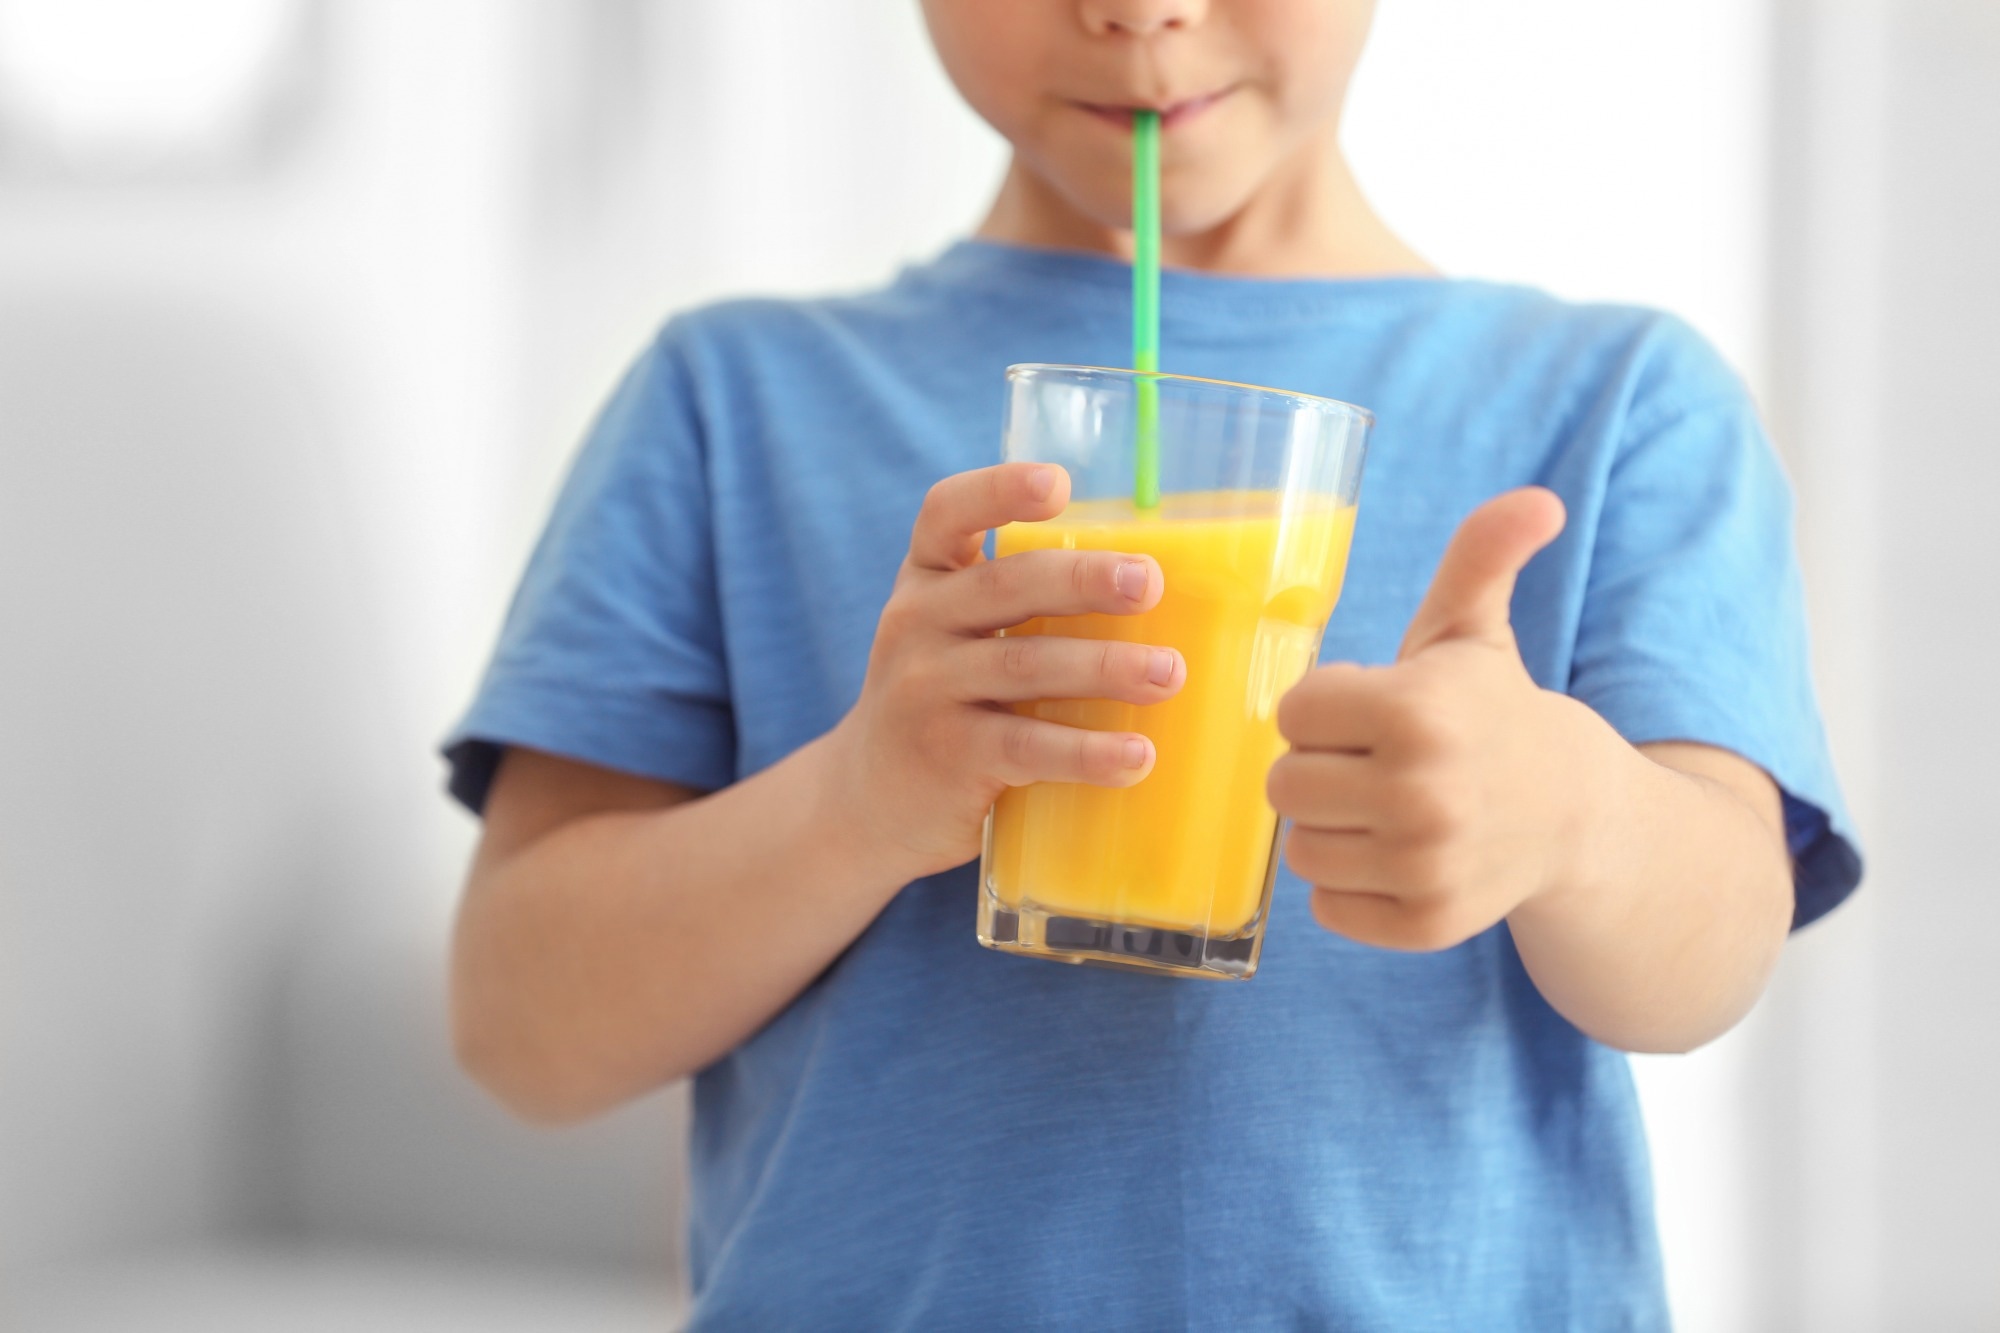 Study: Fruit Juice Consumption, Body Mass Index, and Adolescent Diet Quality in a Biracial Cohort. Image Credit: Africa Studio / Shutterstock